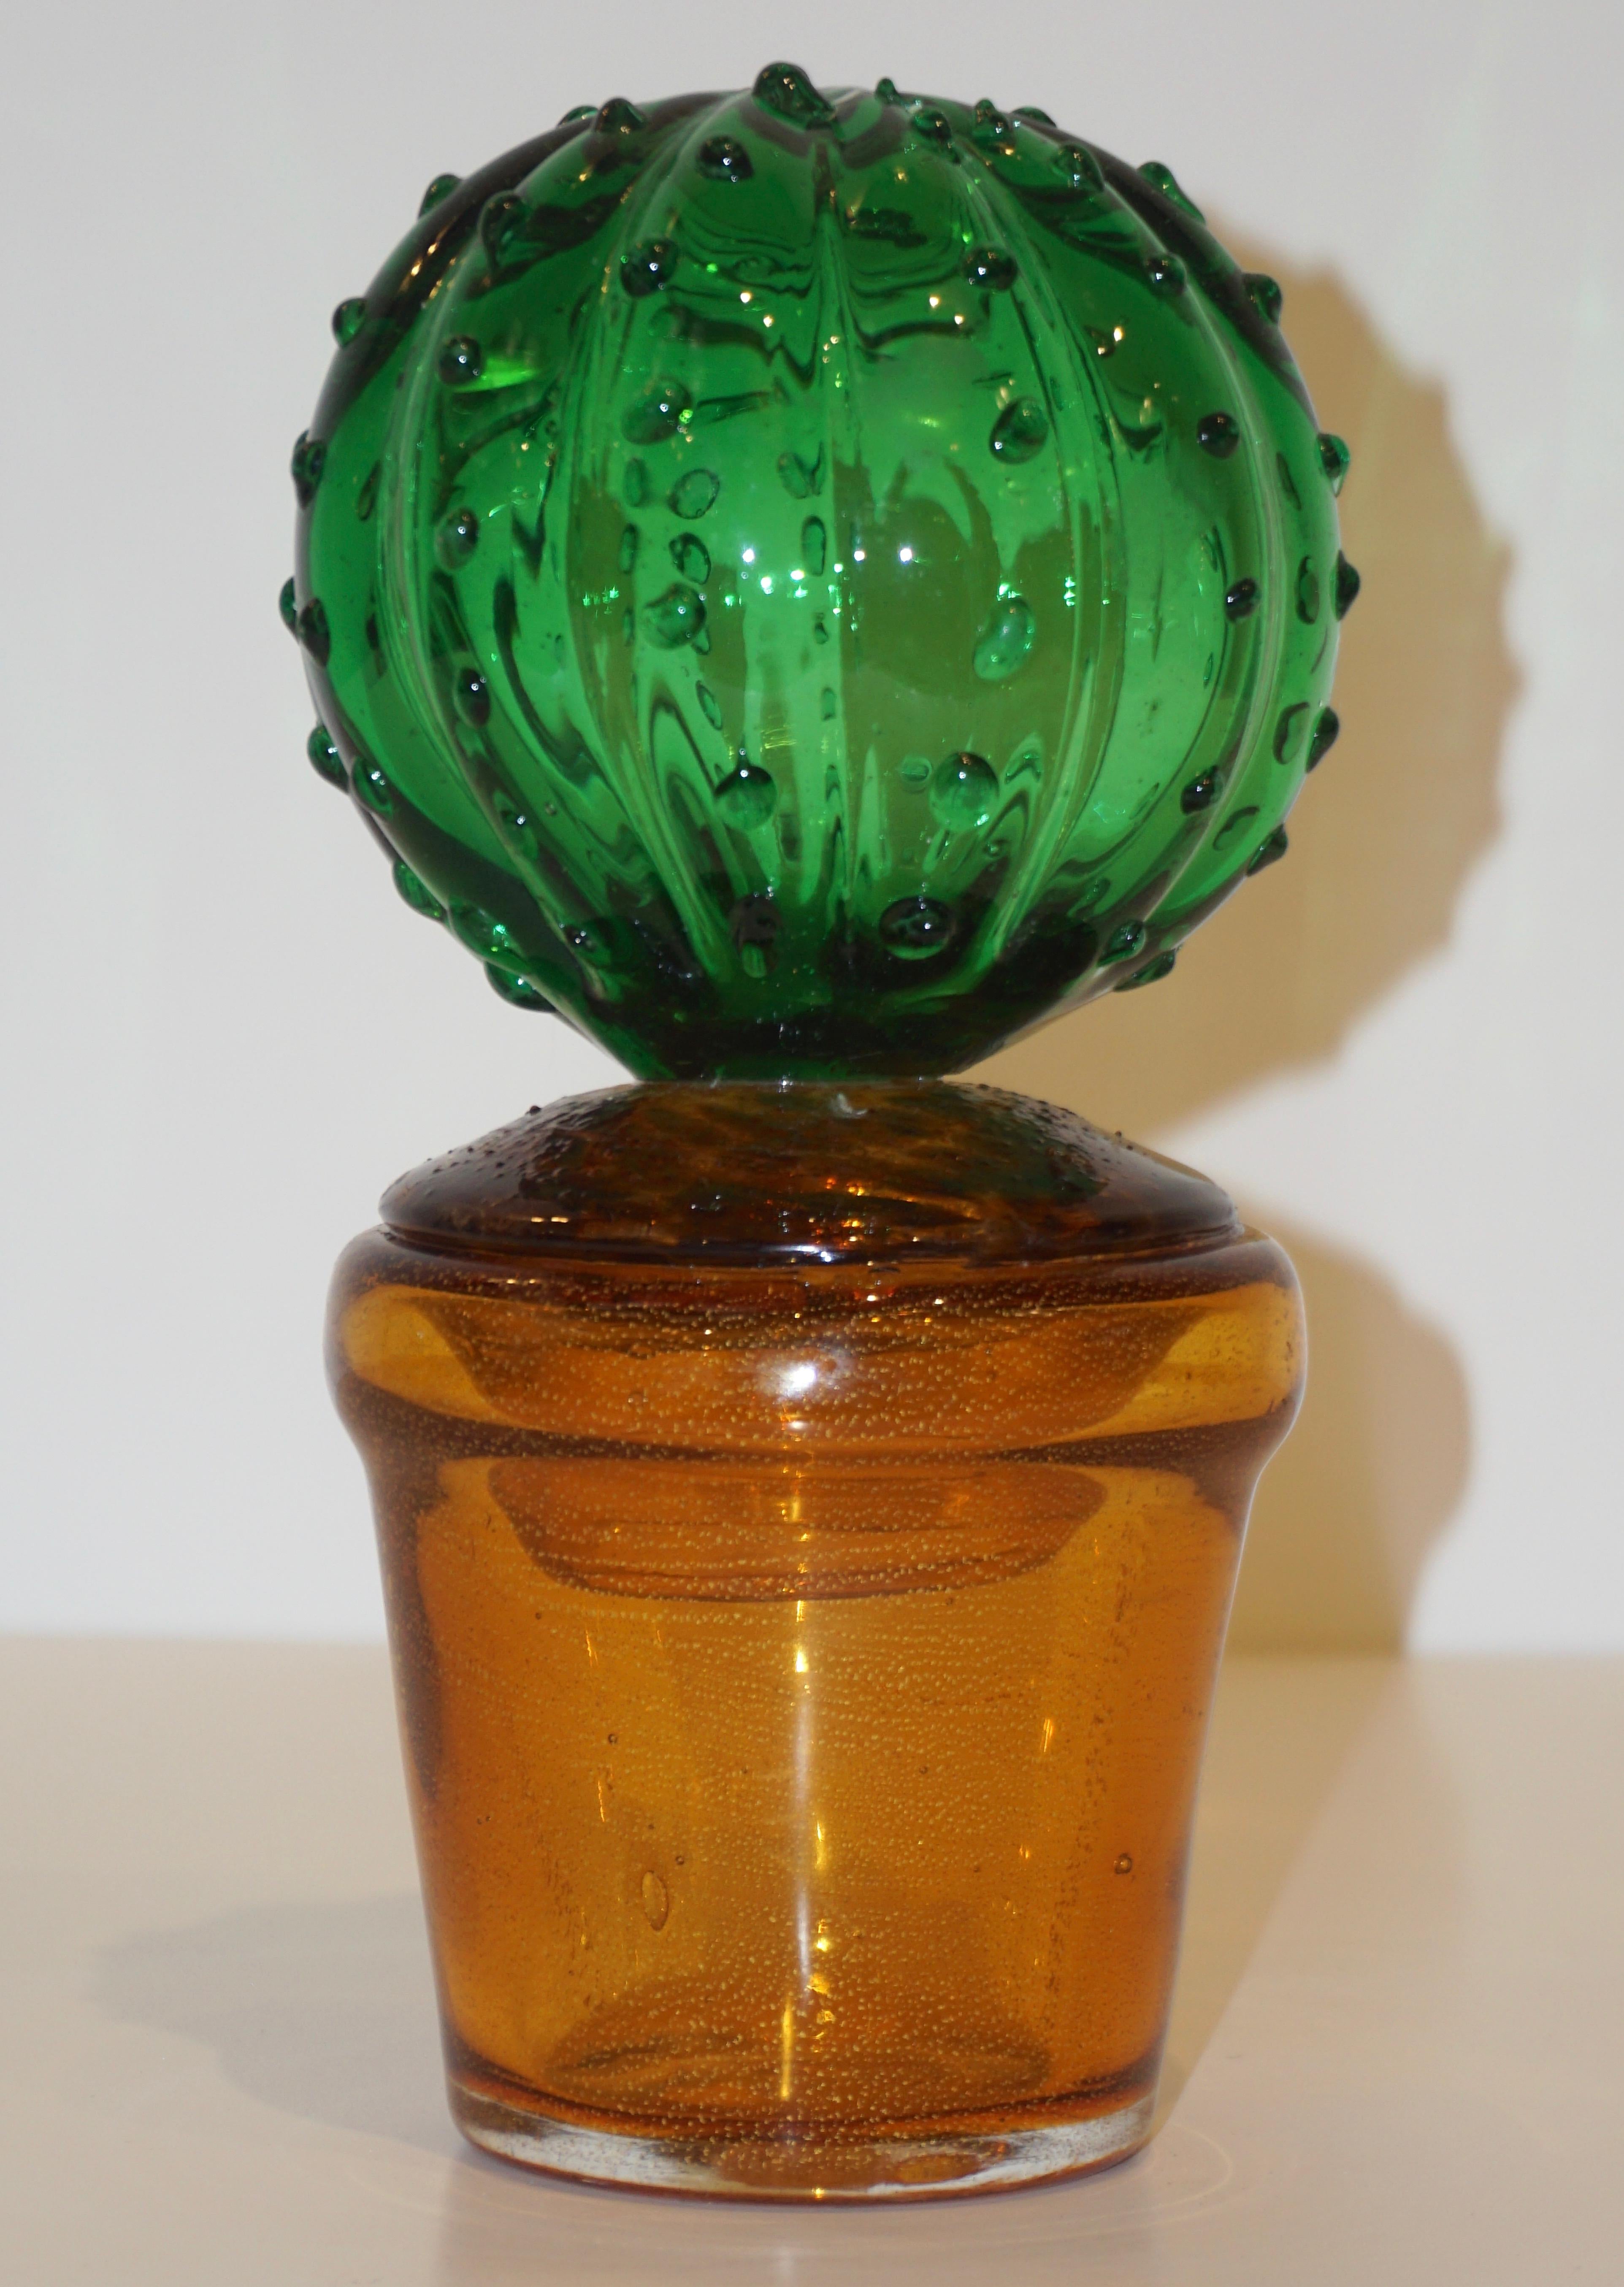 1990s Vintage Italian Vivid Green Murano Glass Small Cactus Plant in Gold Pot For Sale 5